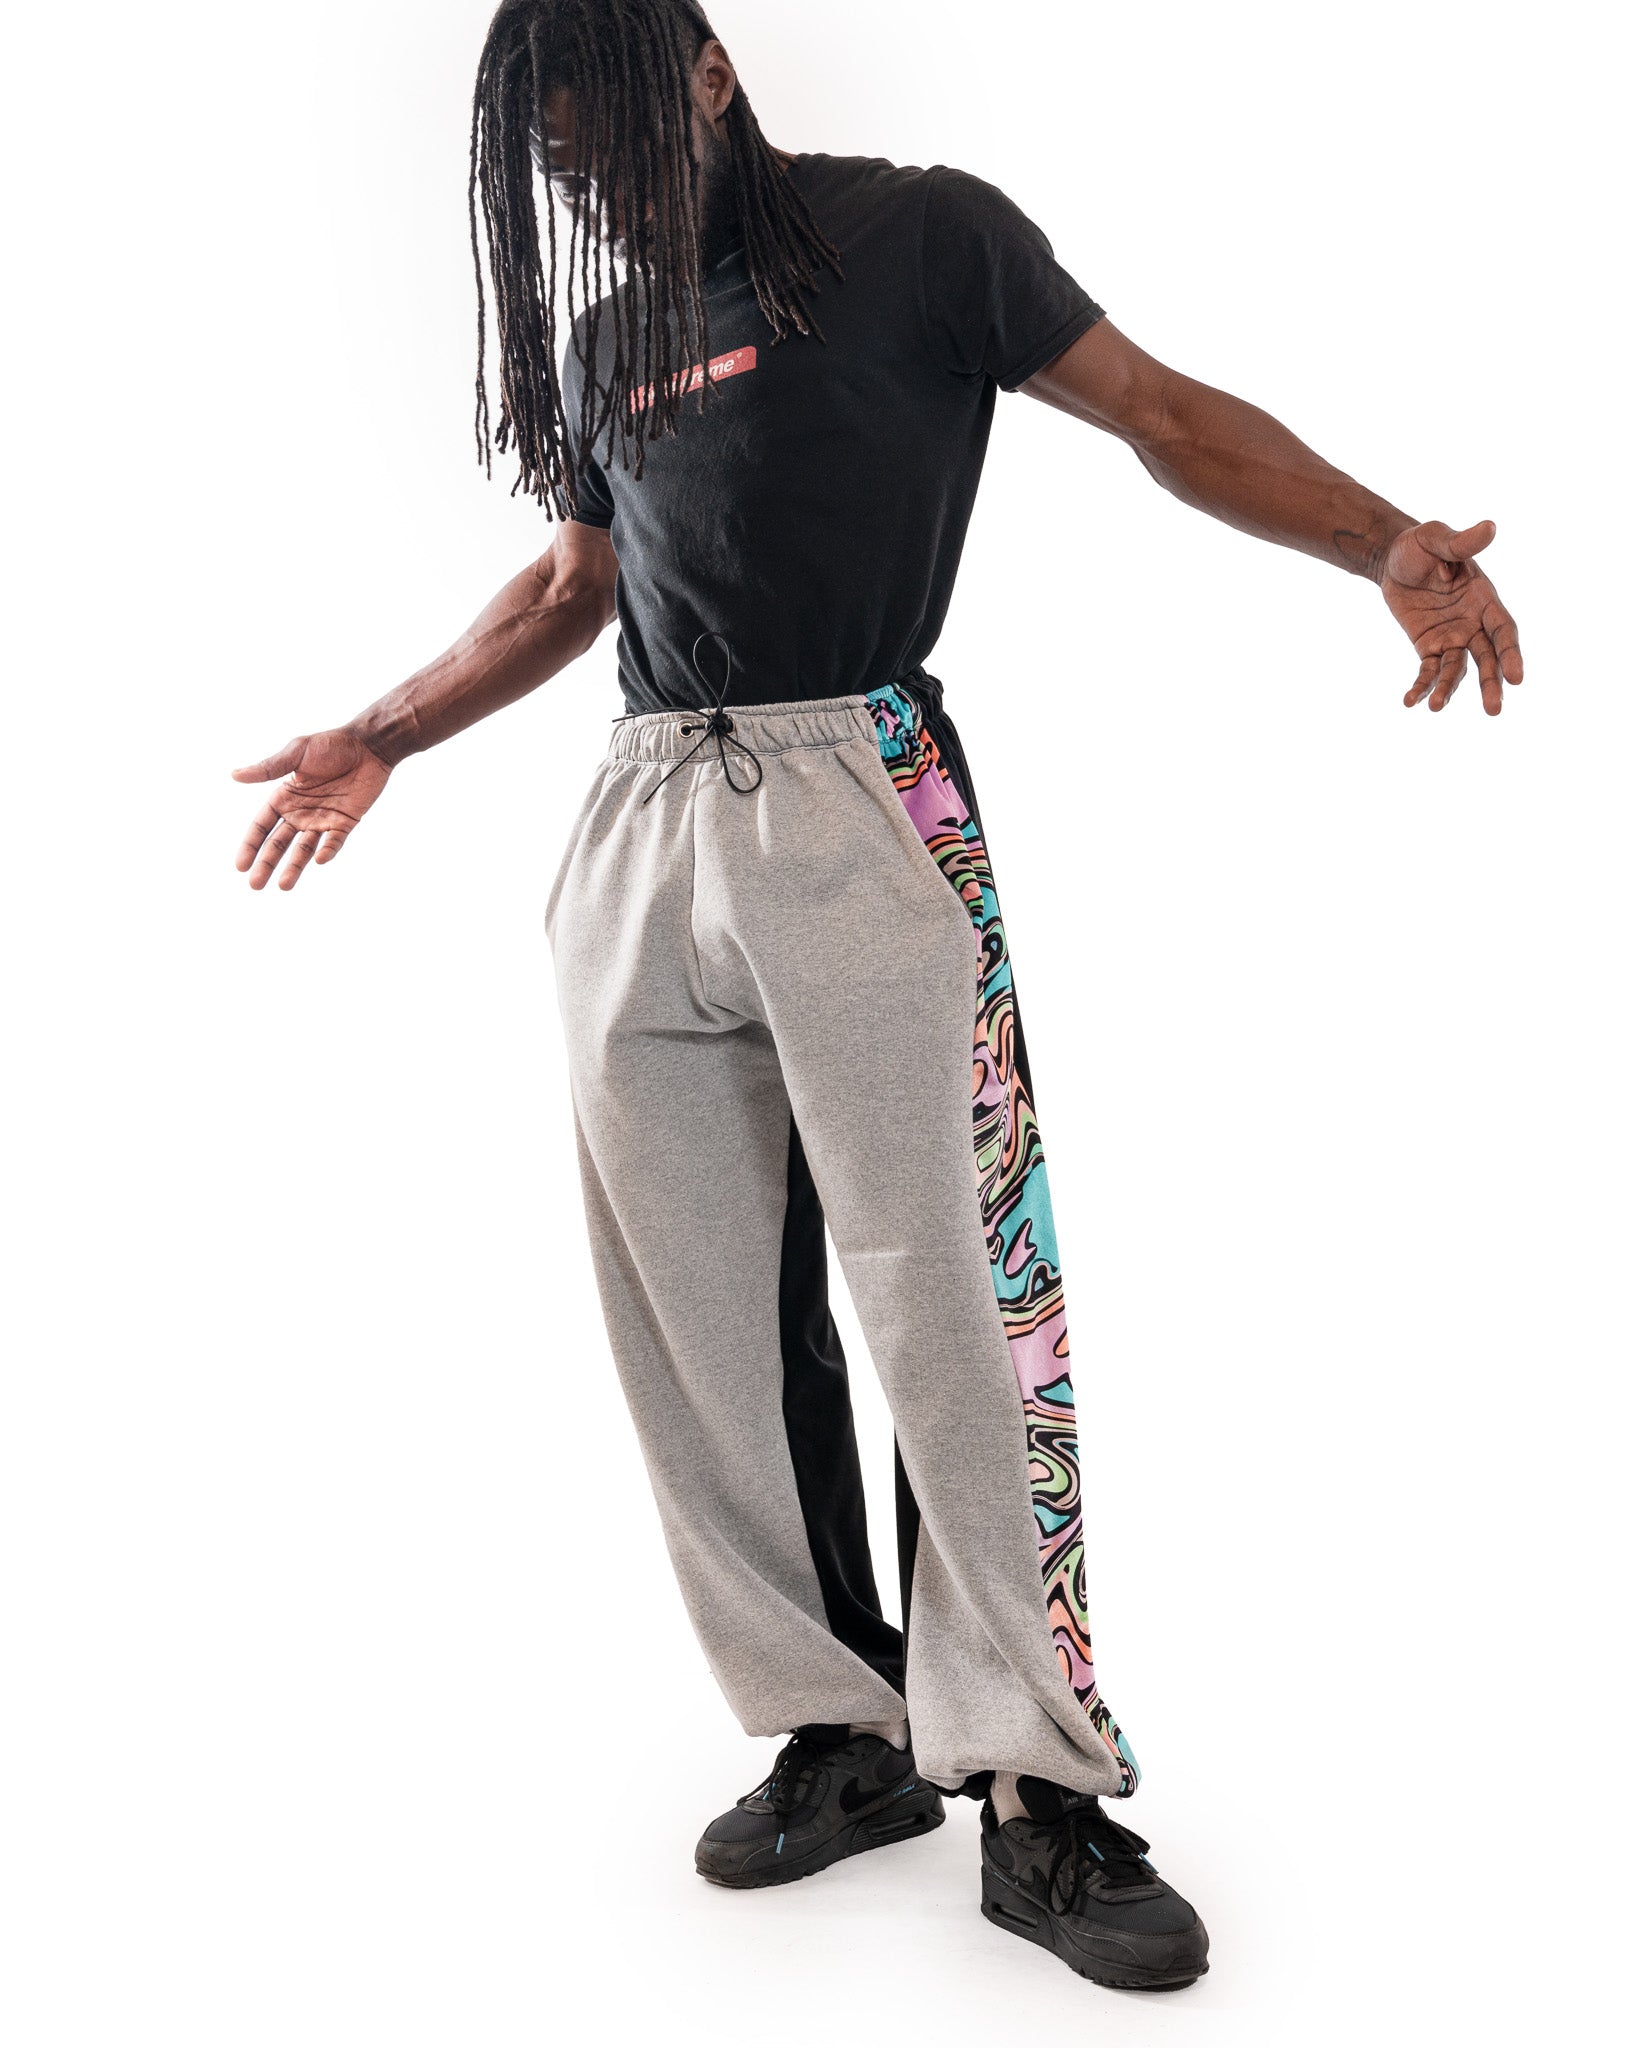 design your own baggy tracksuit bottoms. festival trousers, gym tracksuit bottoms, dance trousers, or everyday joggers. Bellisa X Clothing